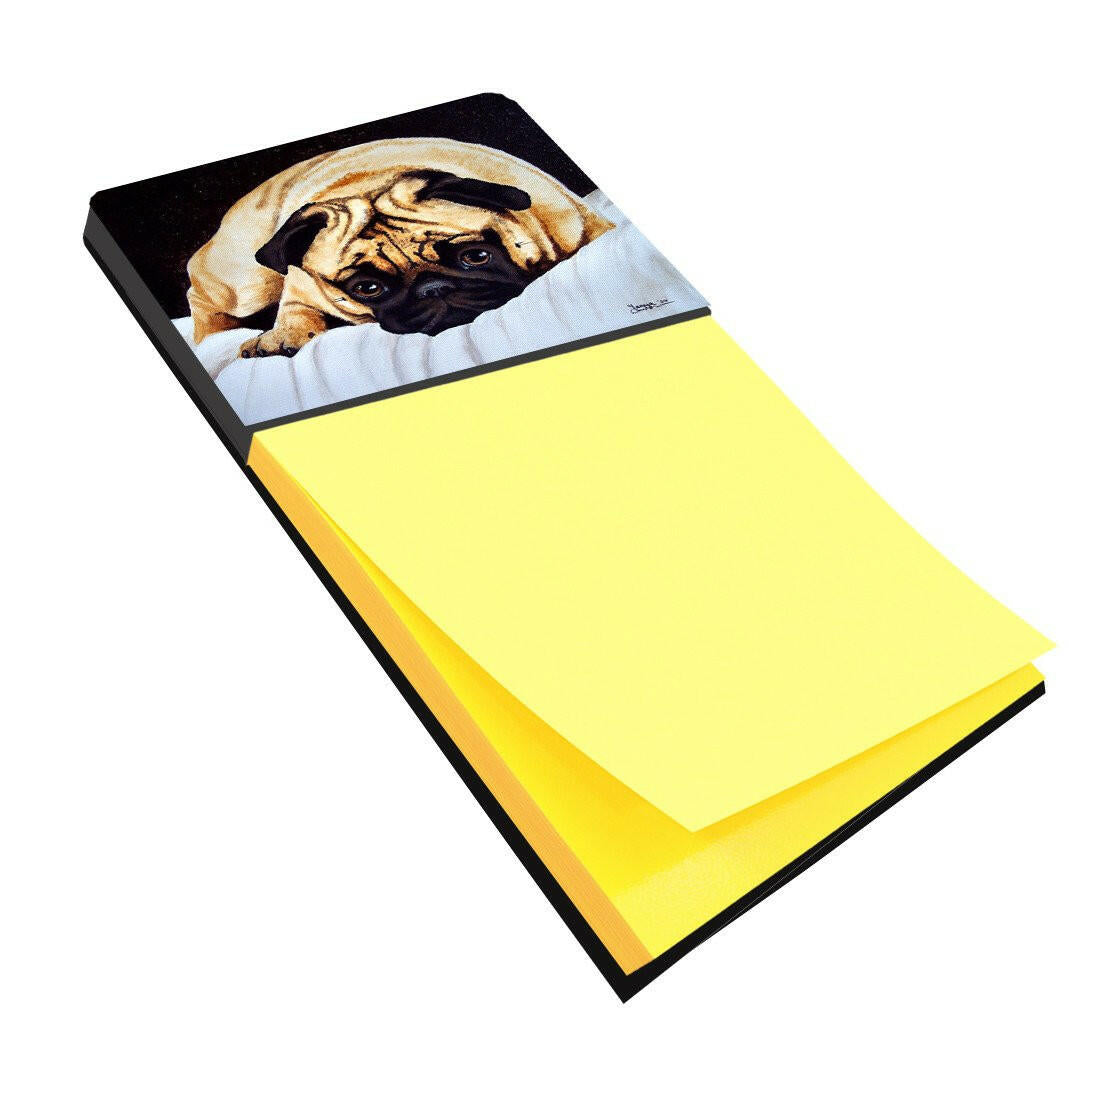 Fred the Pug Sticky Note Holder AMB1194SN by Caroline's Treasures